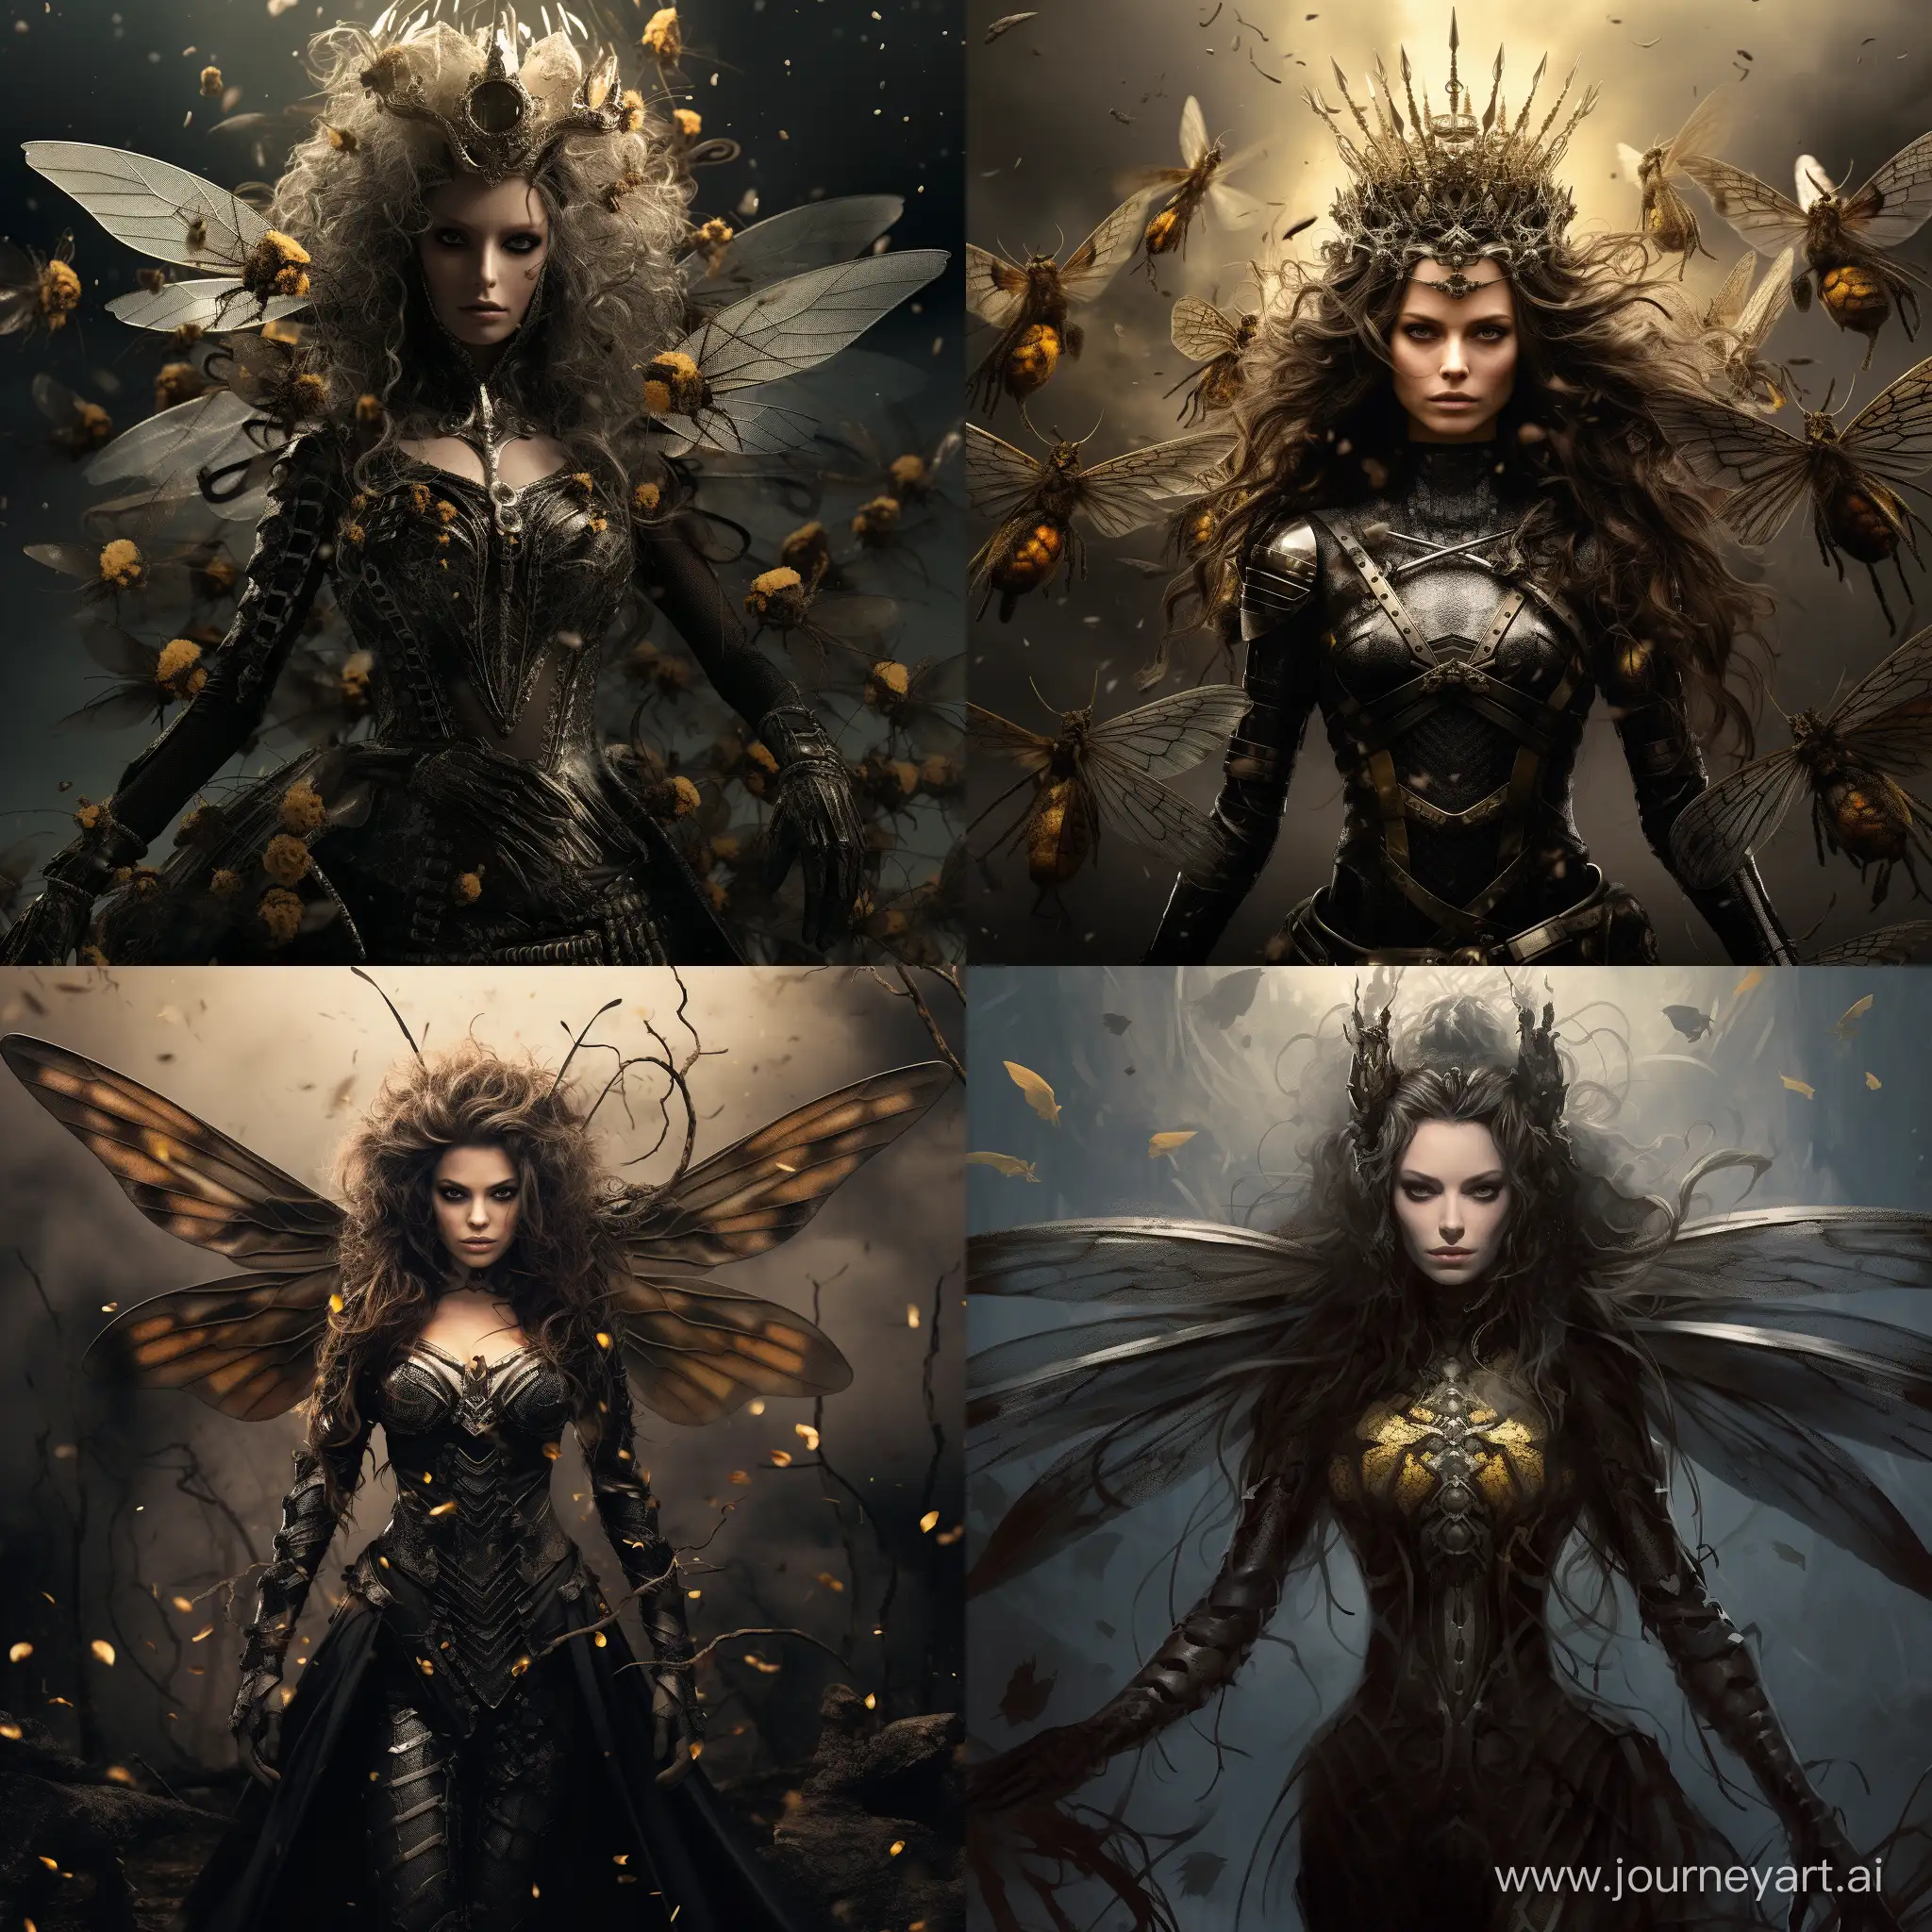 Formidable-Wasp-Queen-Warrior-in-Powerful-Armor